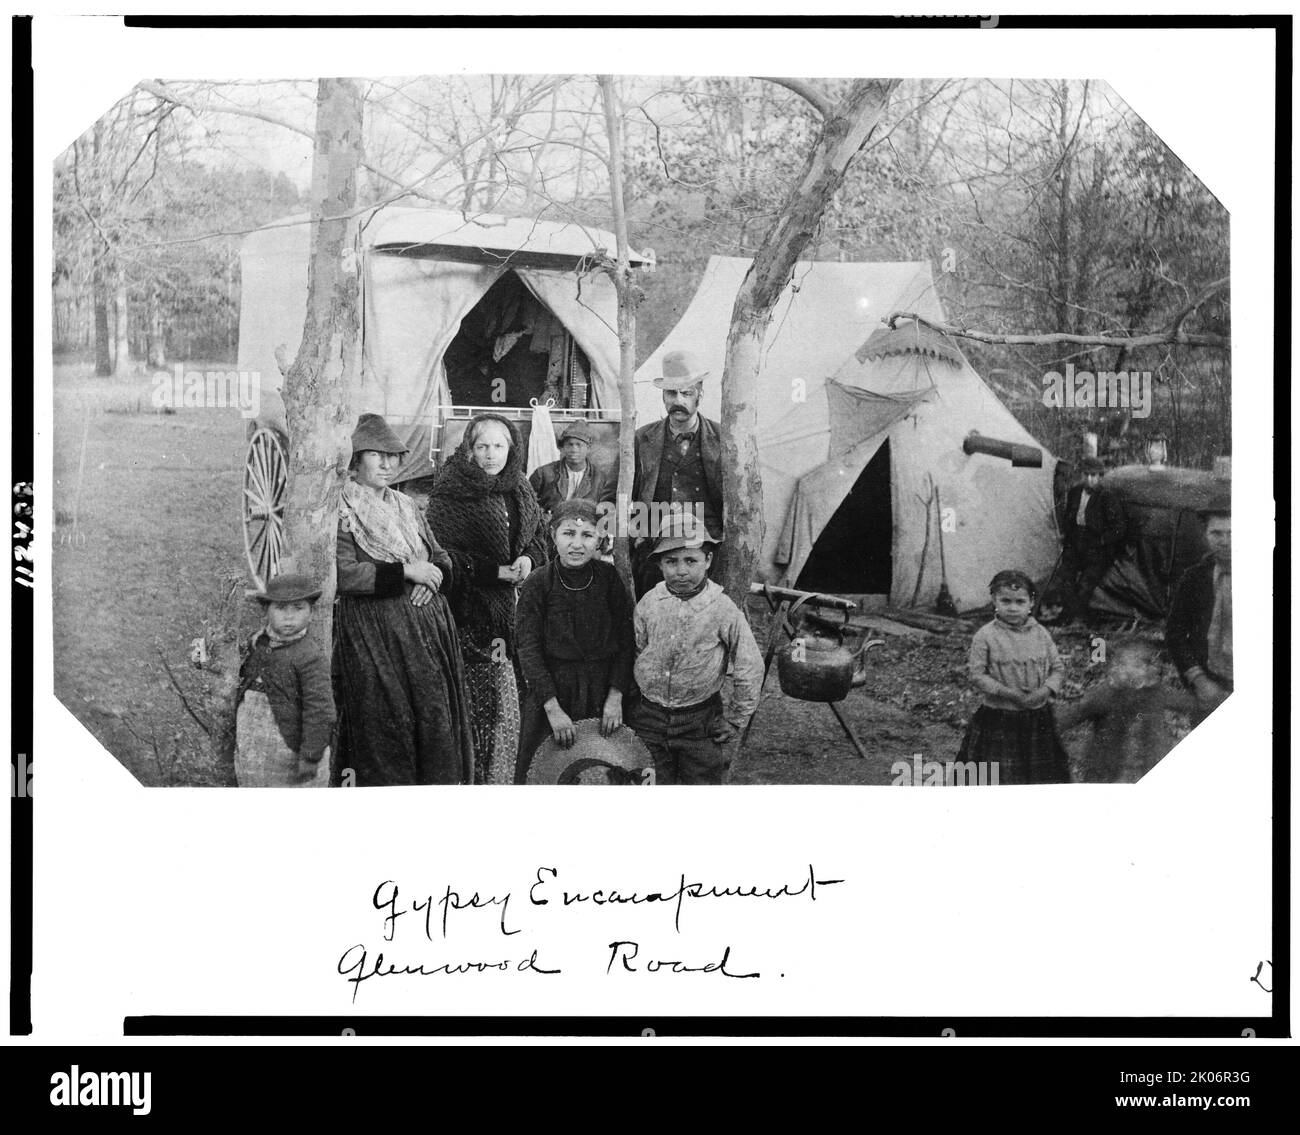 Gypsy encampment Glenwood Road, 1888. Men, women, and children with tent and wagon on Glenwood Road, probably in Bethesda, Maryland. [Note African American boy in background, hole in tent for stove flue]. Stock Photo